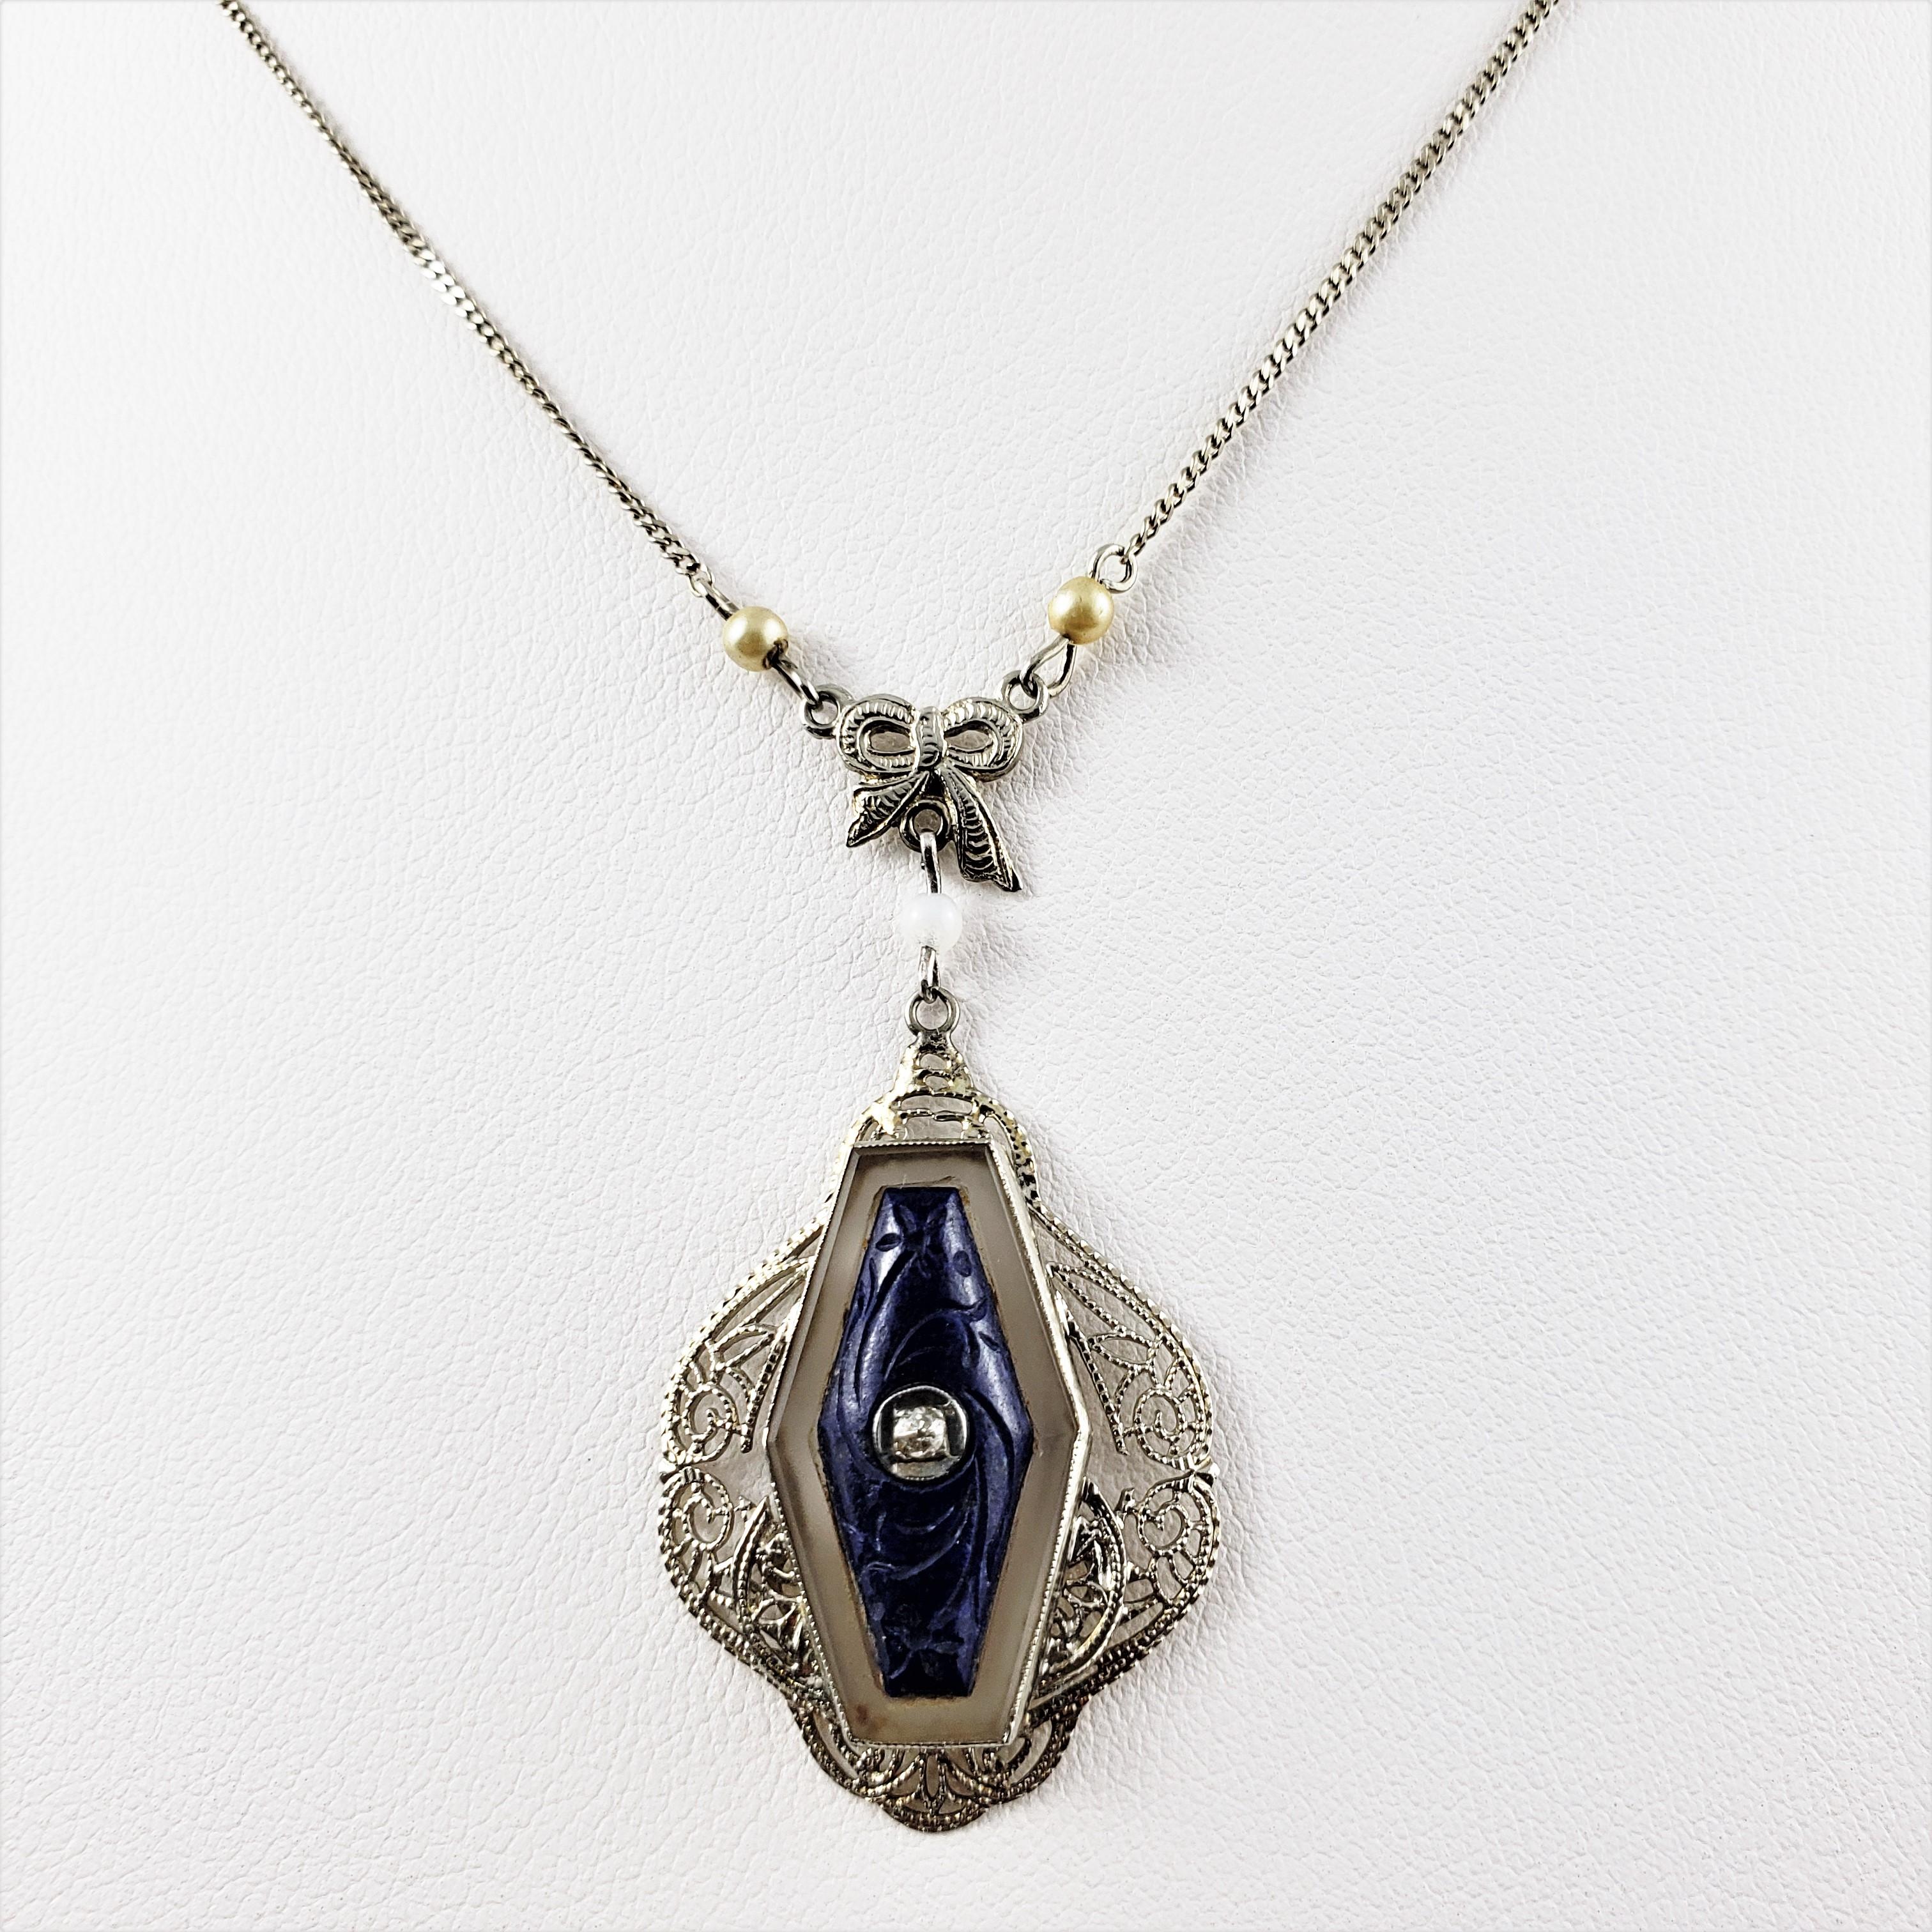 14 Karat White Gold Carved Lapis and Diamond Pendant Necklace For Sale 1